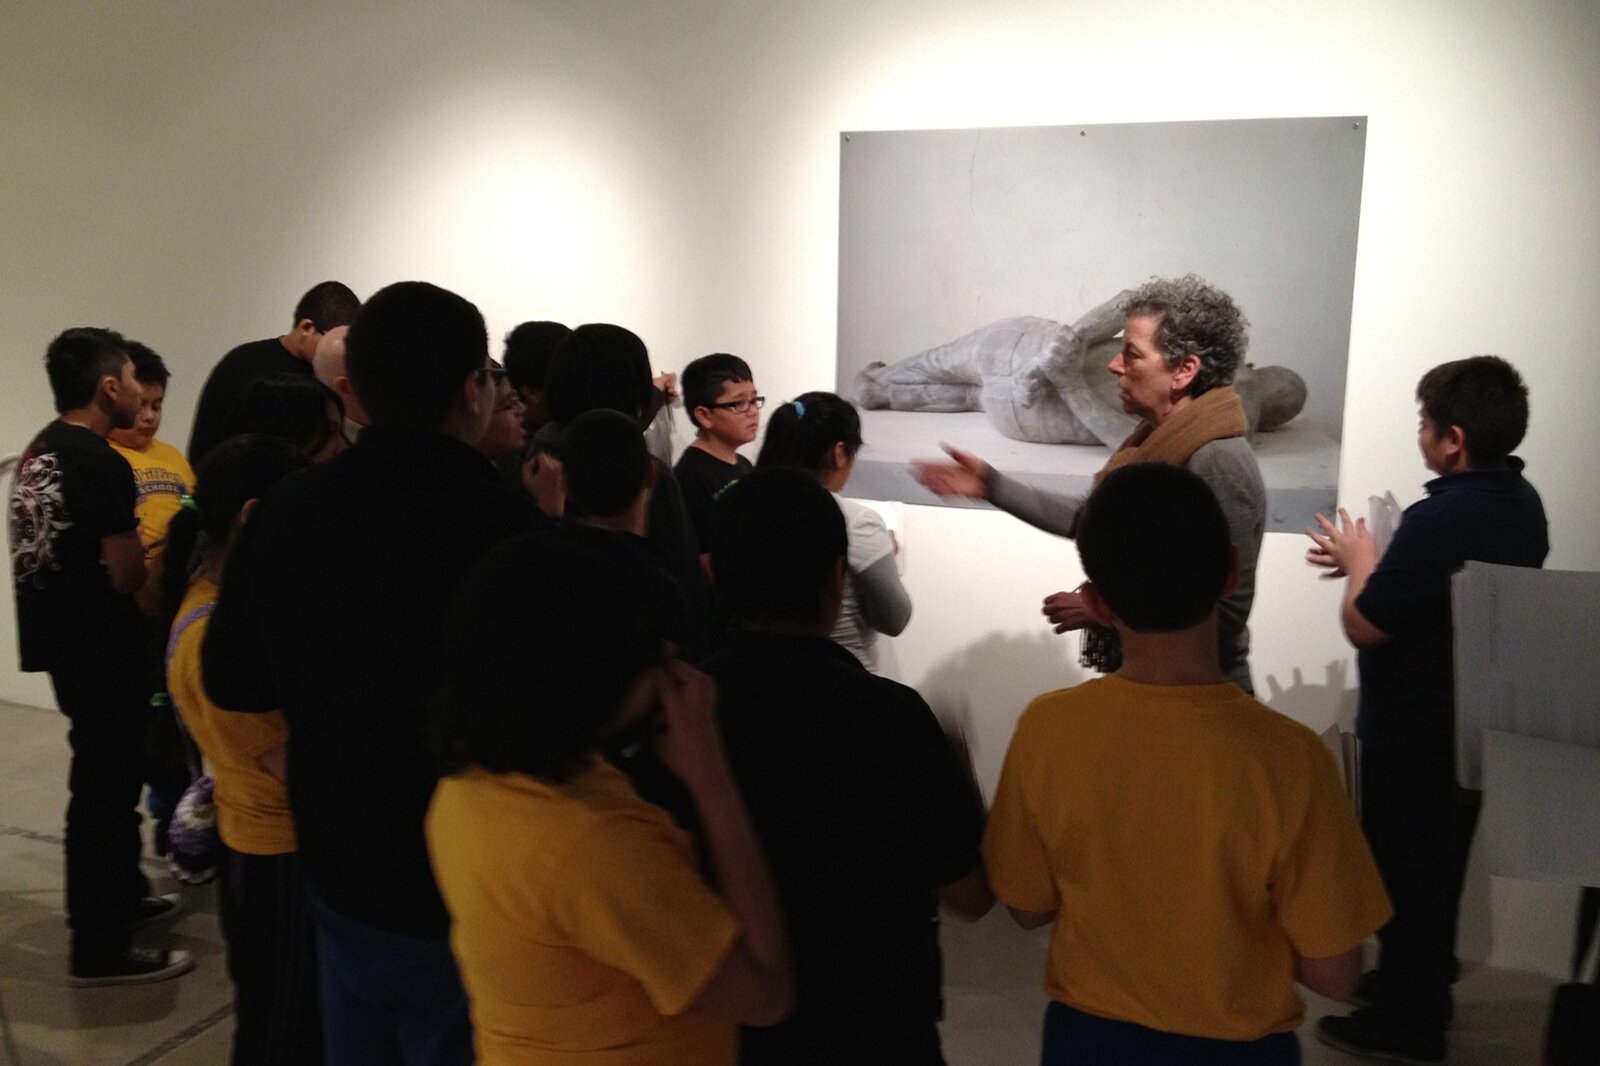  CTJM, Opening The Black Box, The Charge is Torture, The Sullivan Galleries, School of the Art Institute of Chicago, 2012 